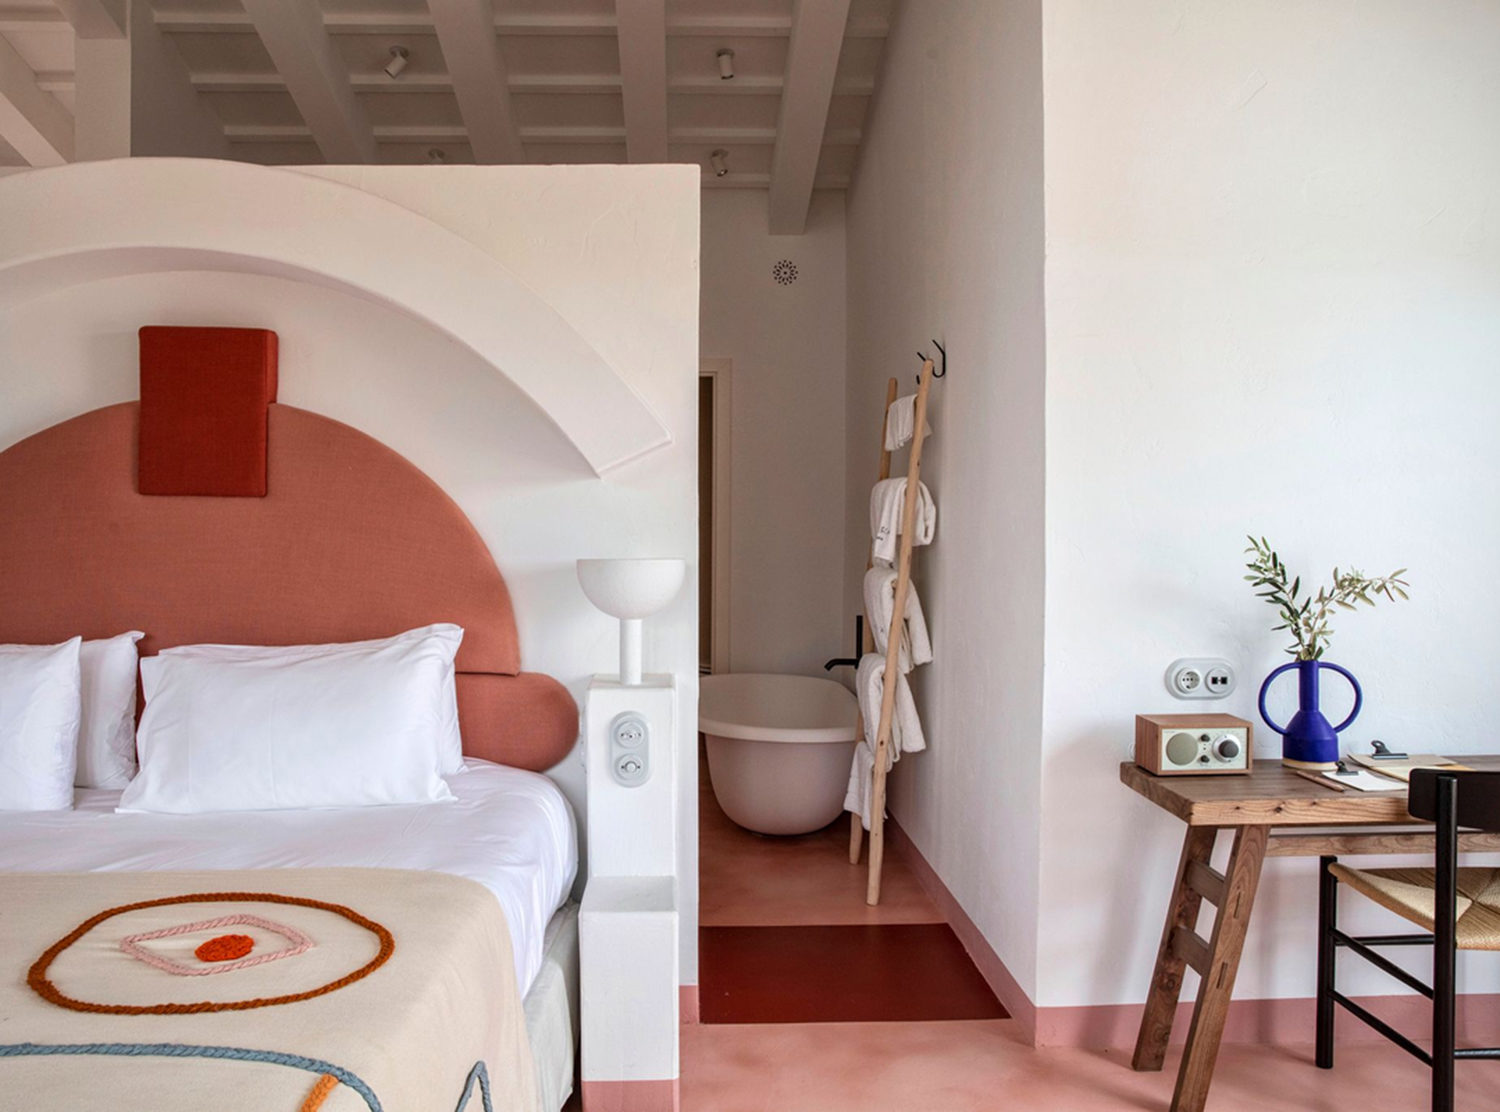 Menorca Experimental The fun continues into bathroom — designed to be both cute and functional